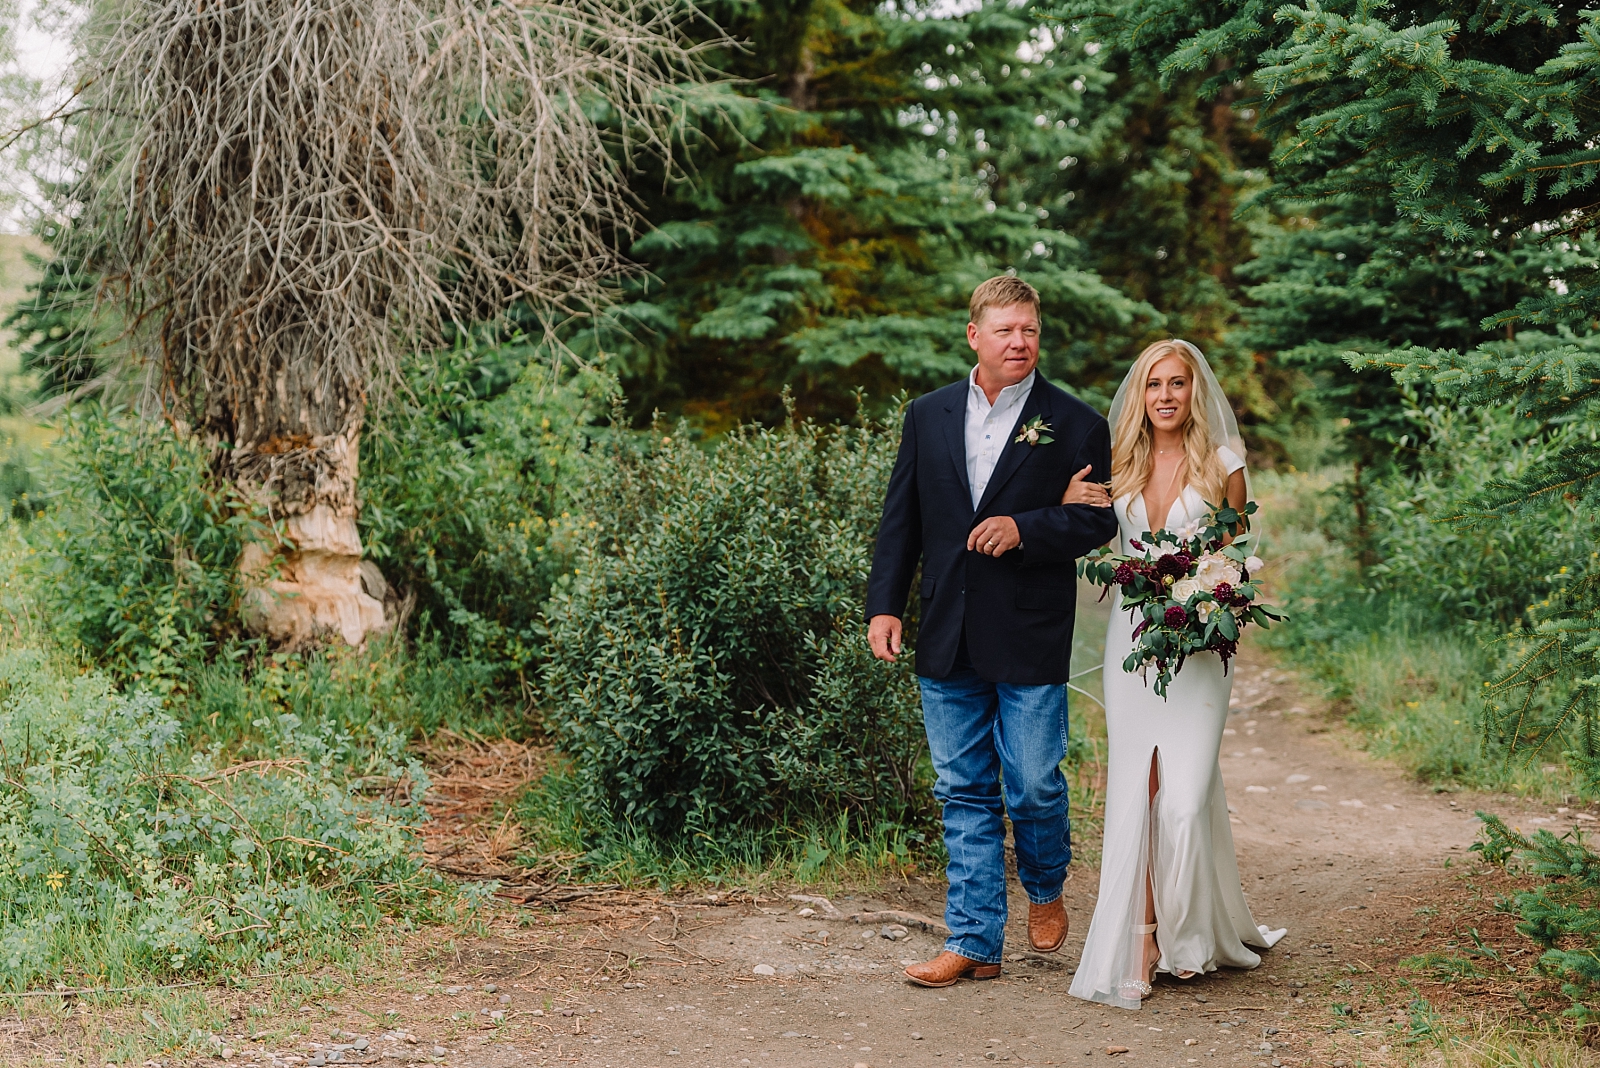 Father walks daughter down the aisle in outdoor wedding ceremony